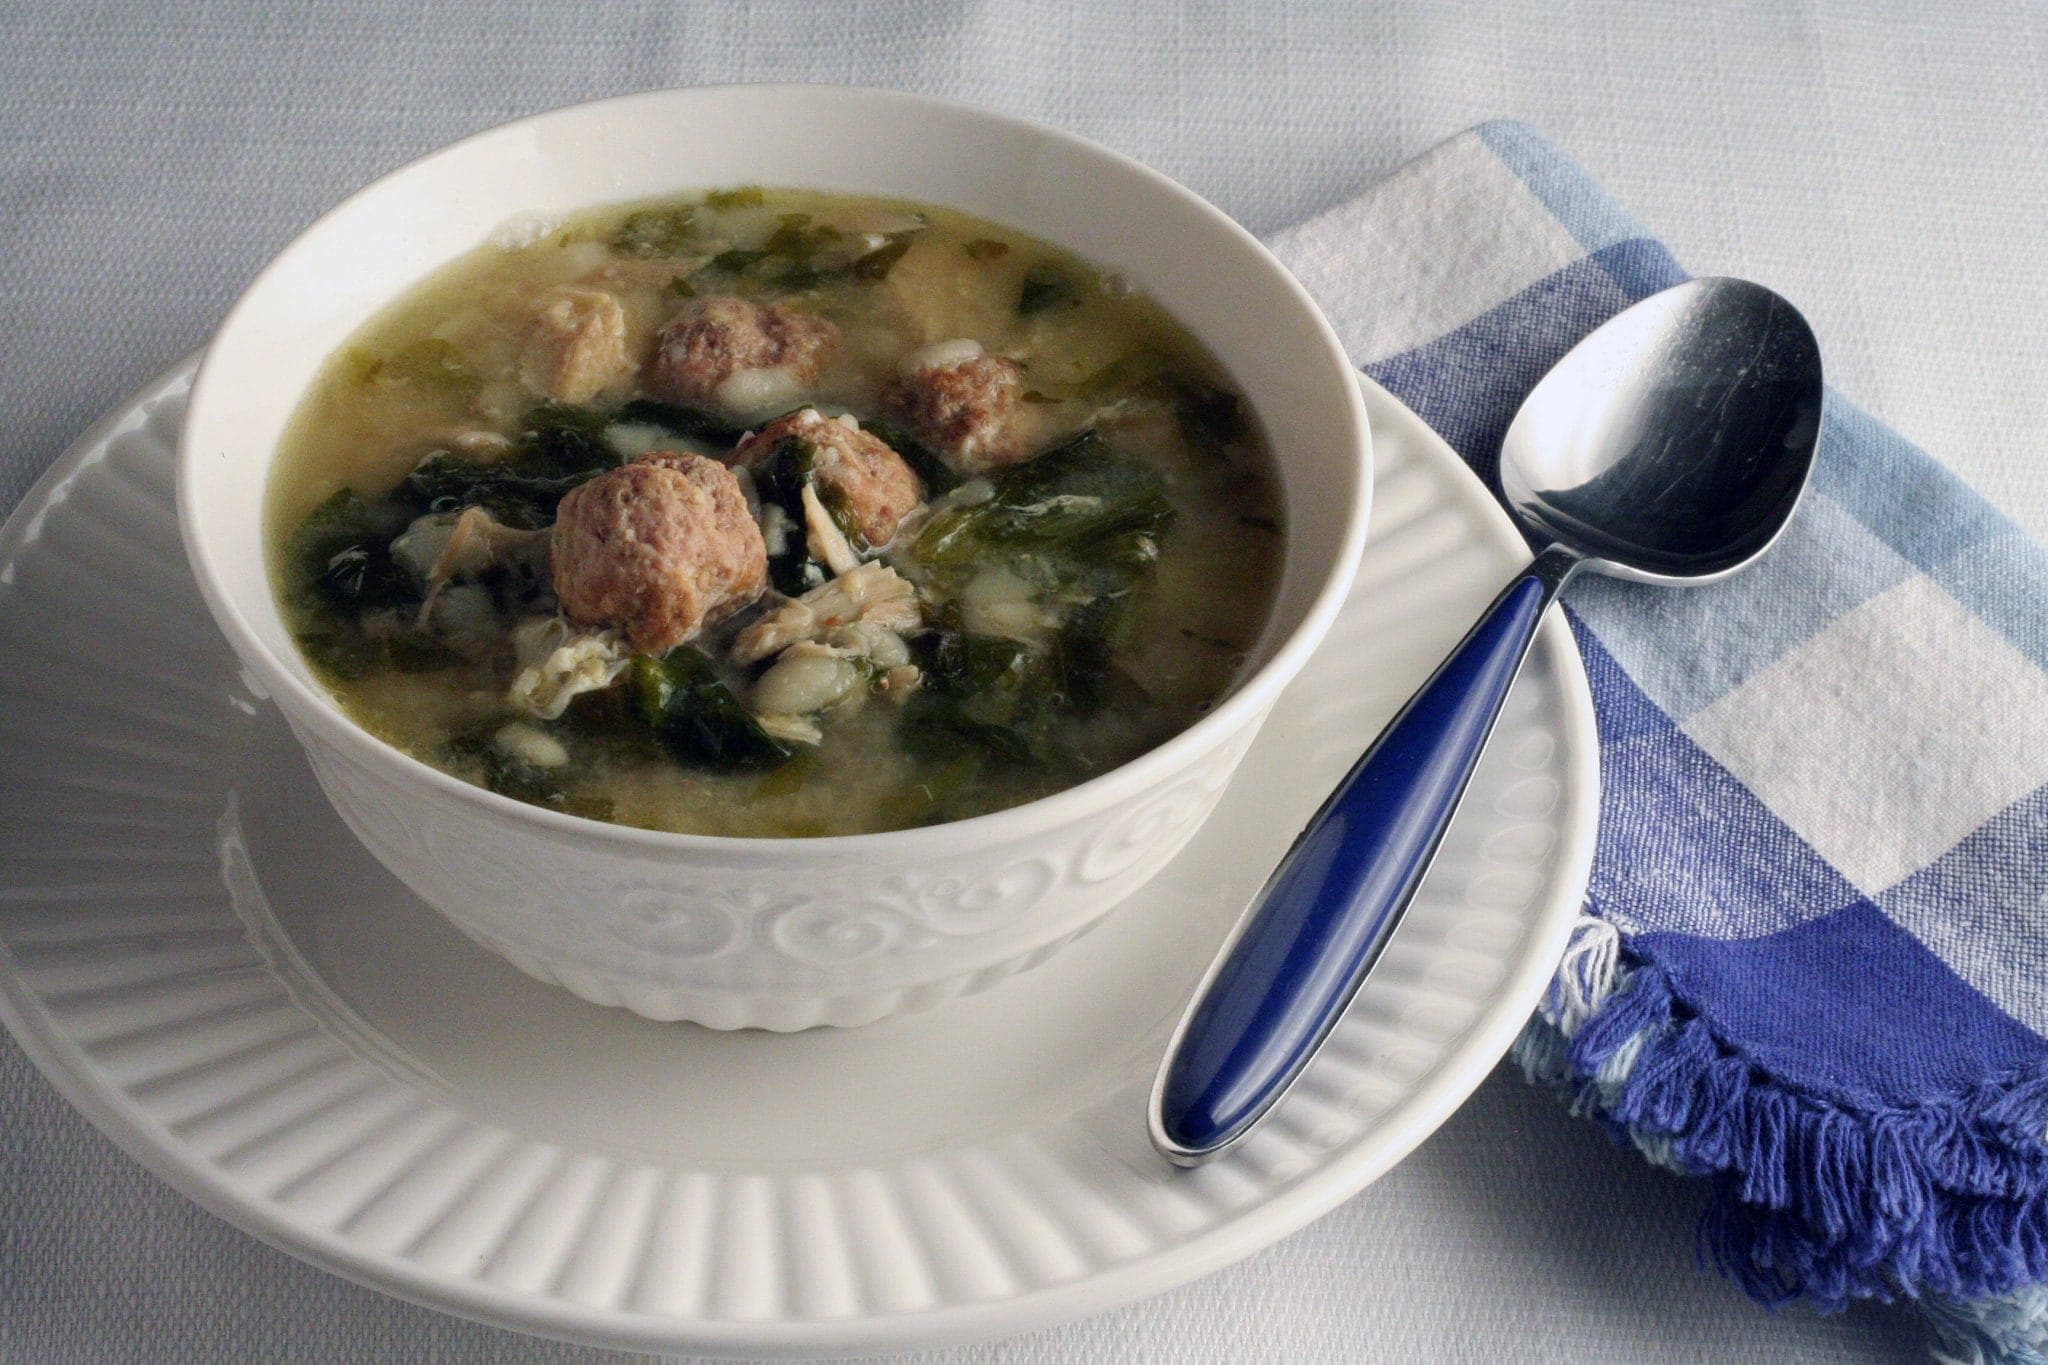 You will want to try this Authentic Italian Wedding Soup Recipe